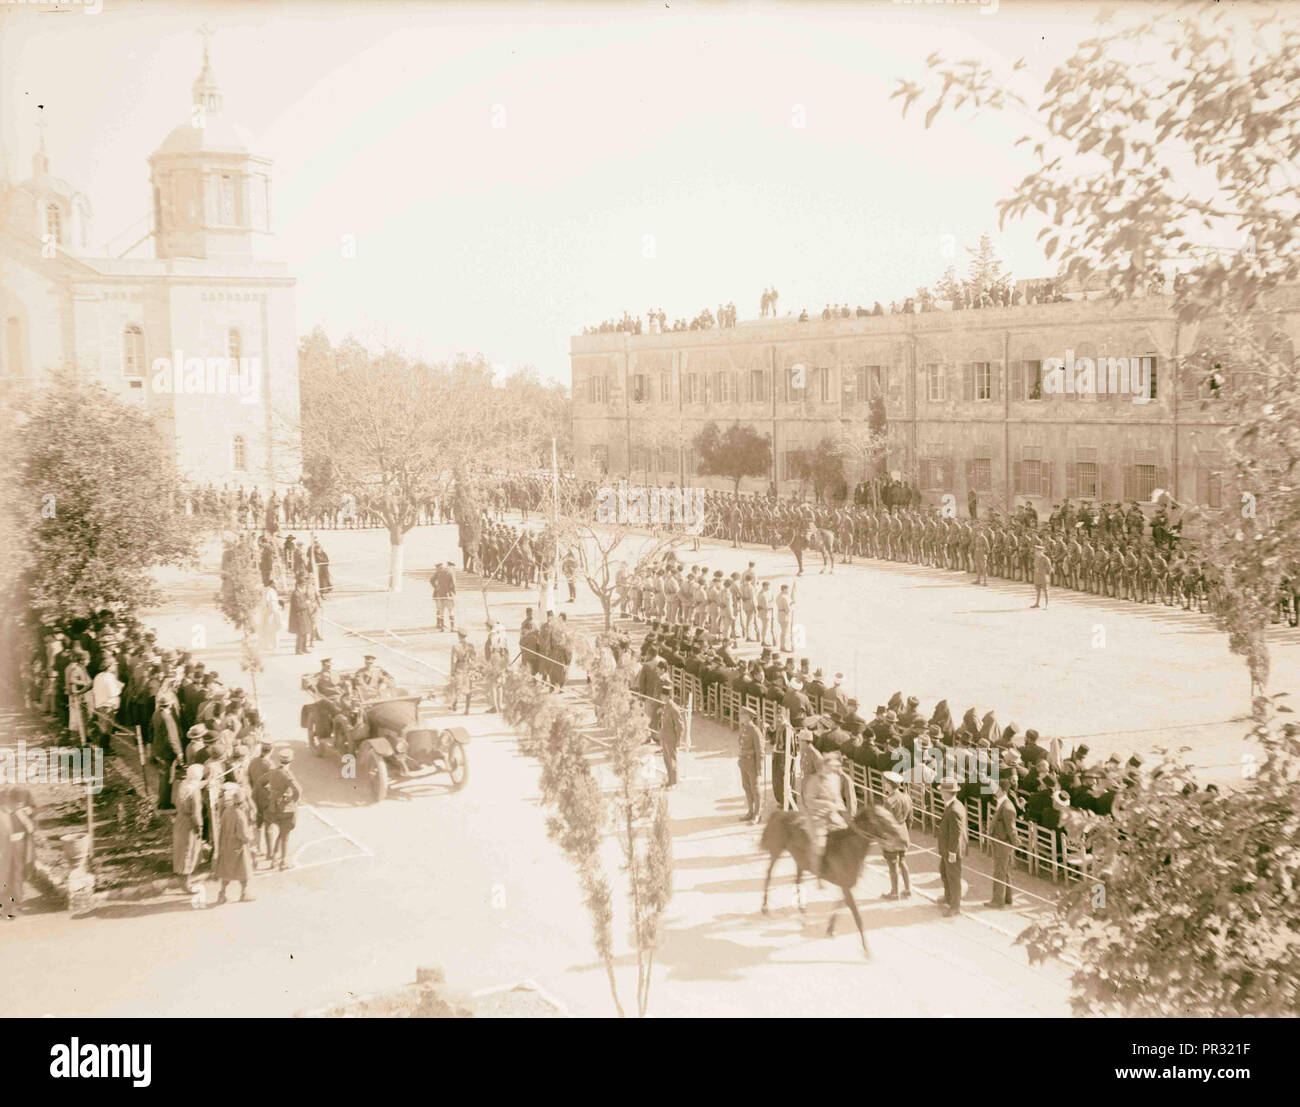 Allenby's official entry with military review at Russian Compound. British troops on parade. 1917, Middle East, Israel Stock Photo